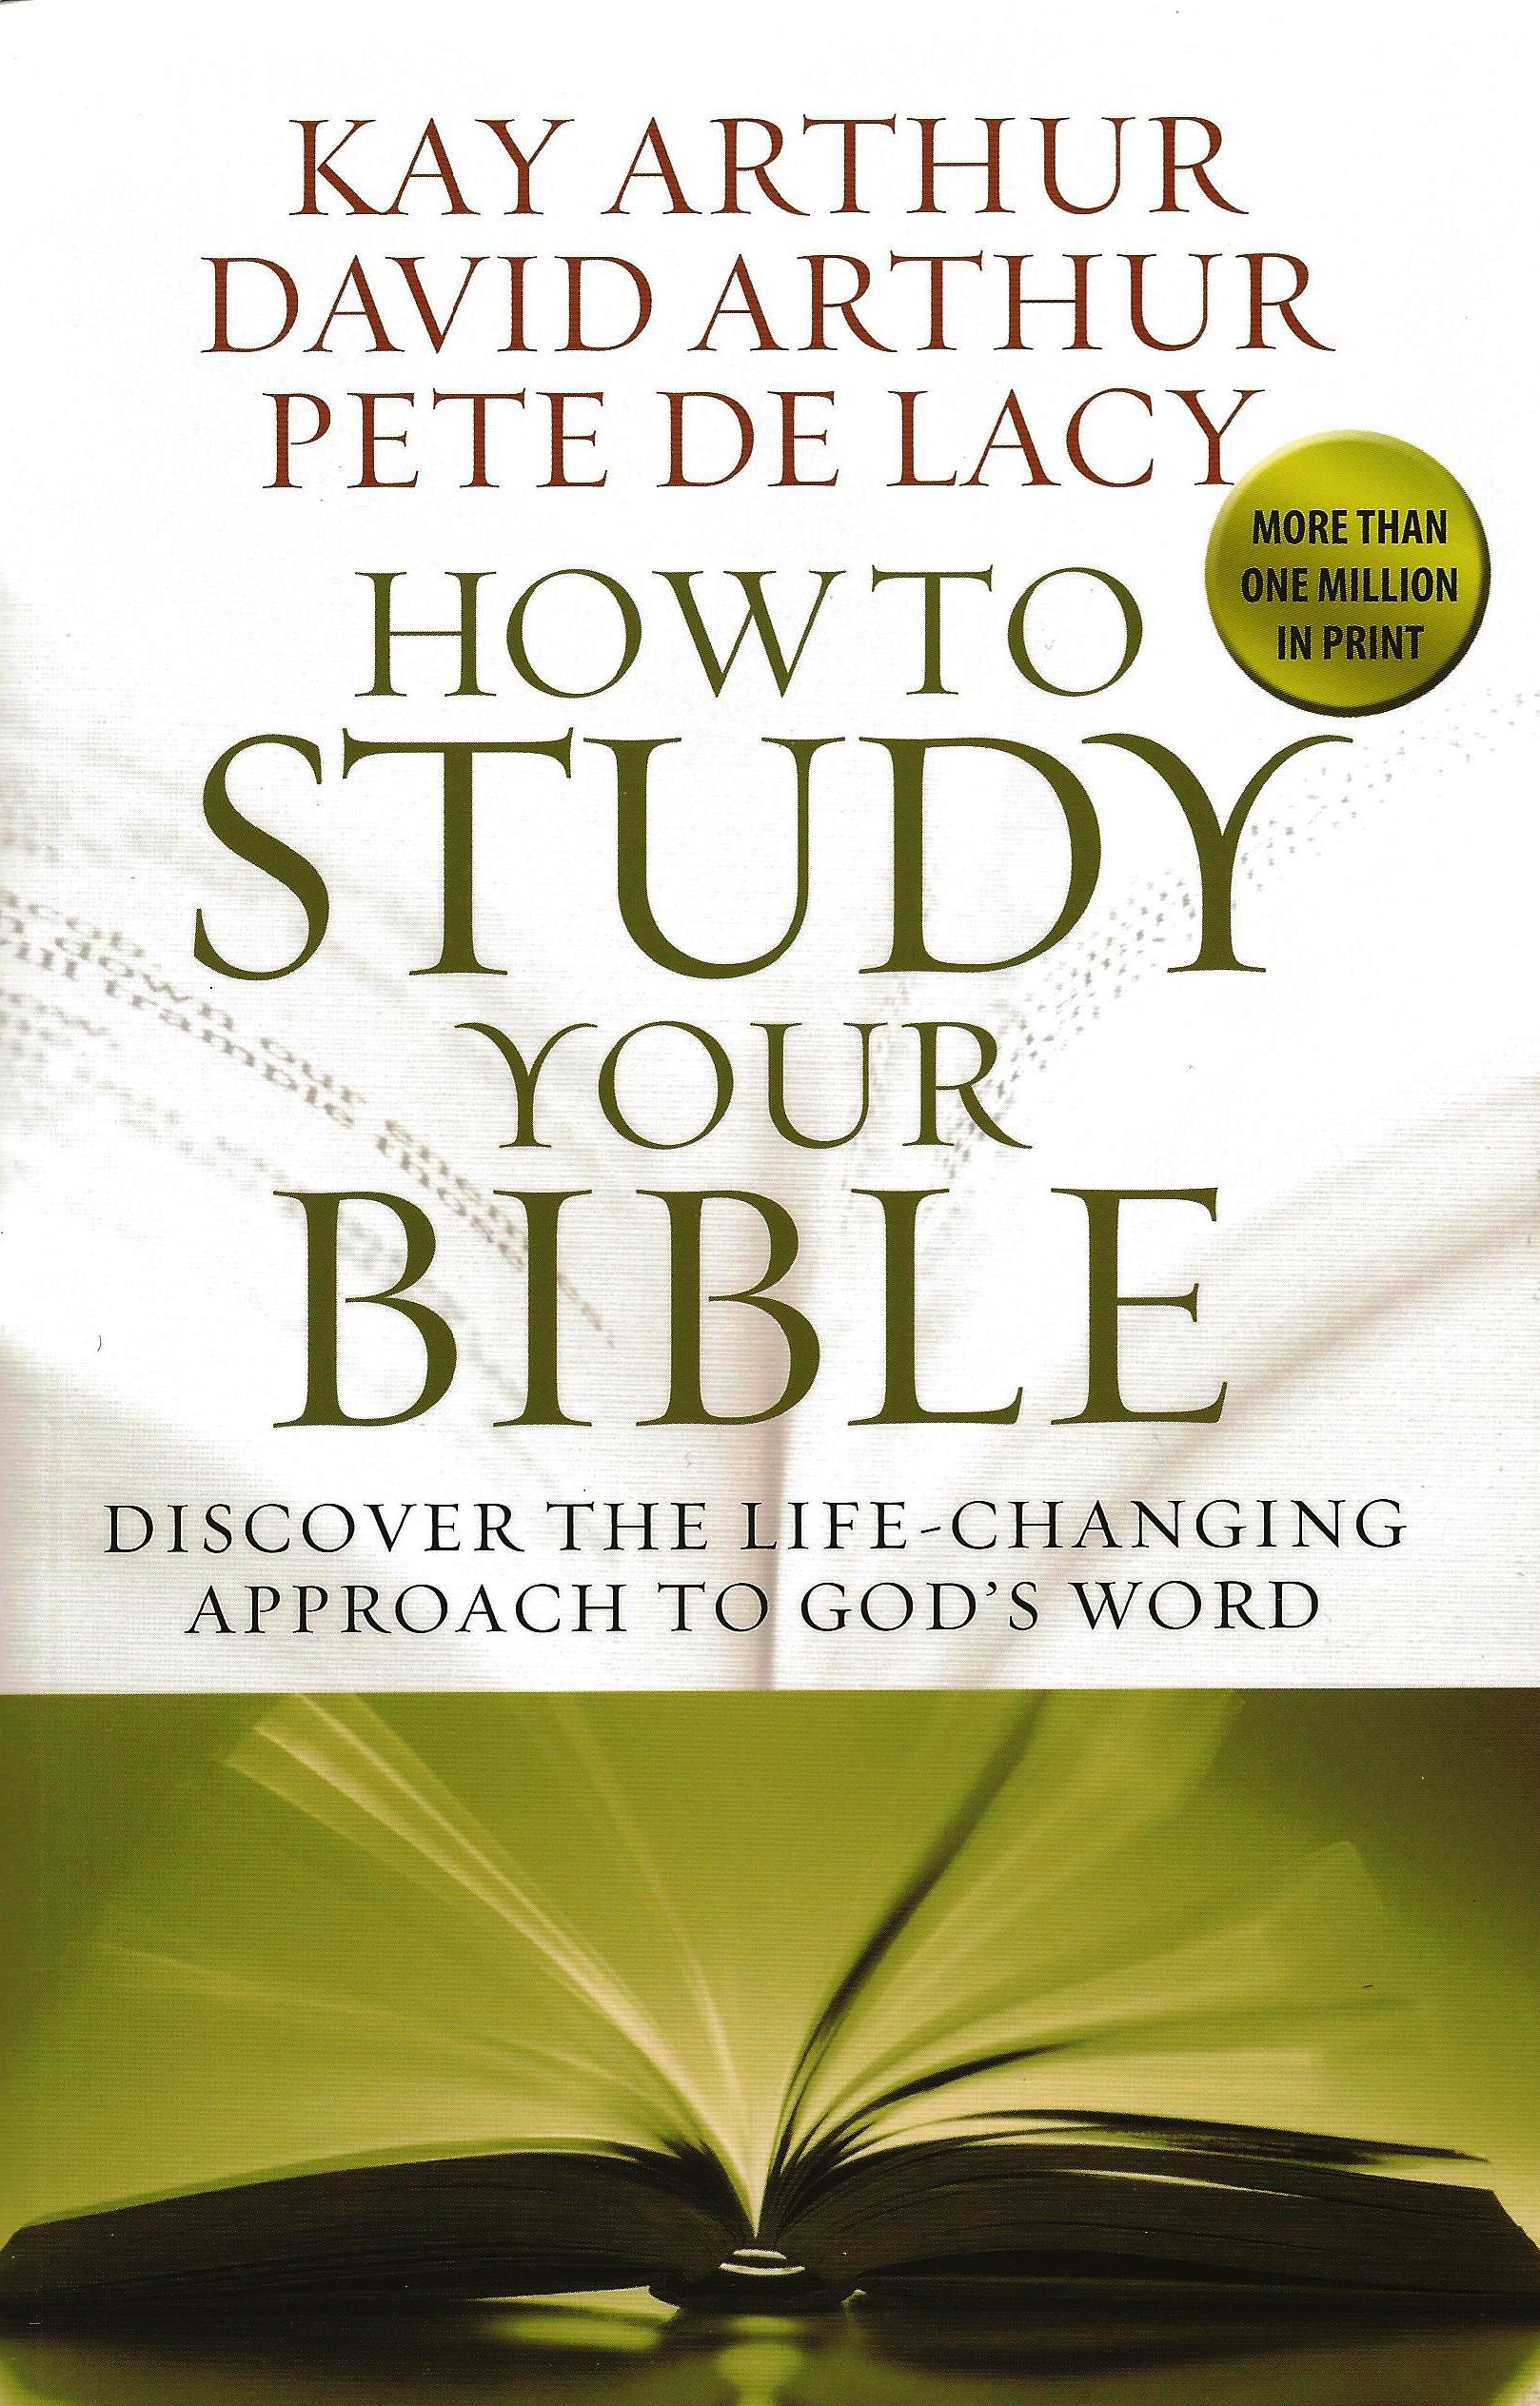 THE NEW HOW TO STUDY YOUR BIBLE Kay Arthur